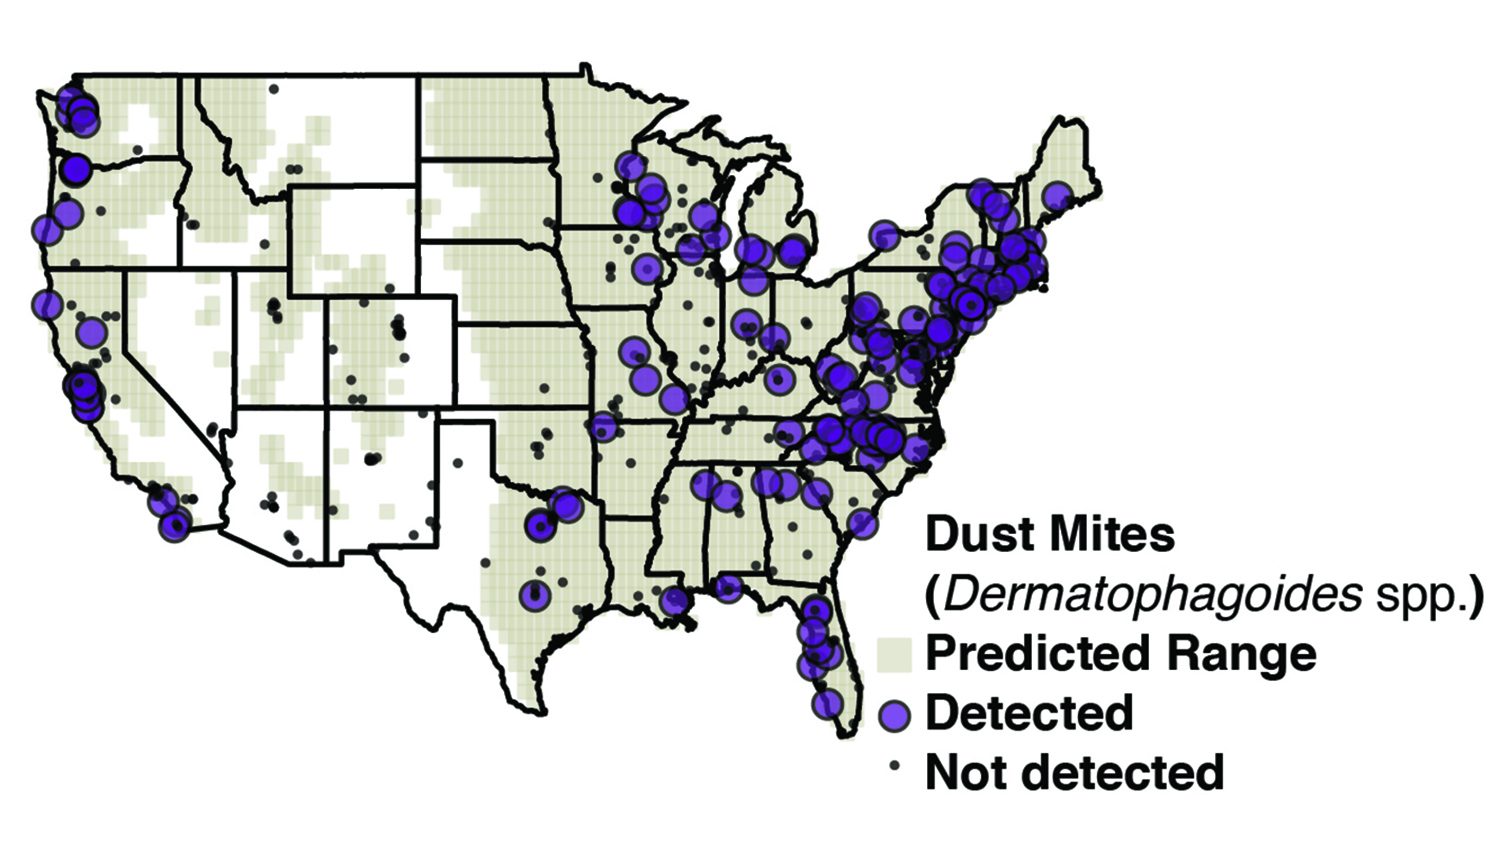 Map of US with dust mite concentrations